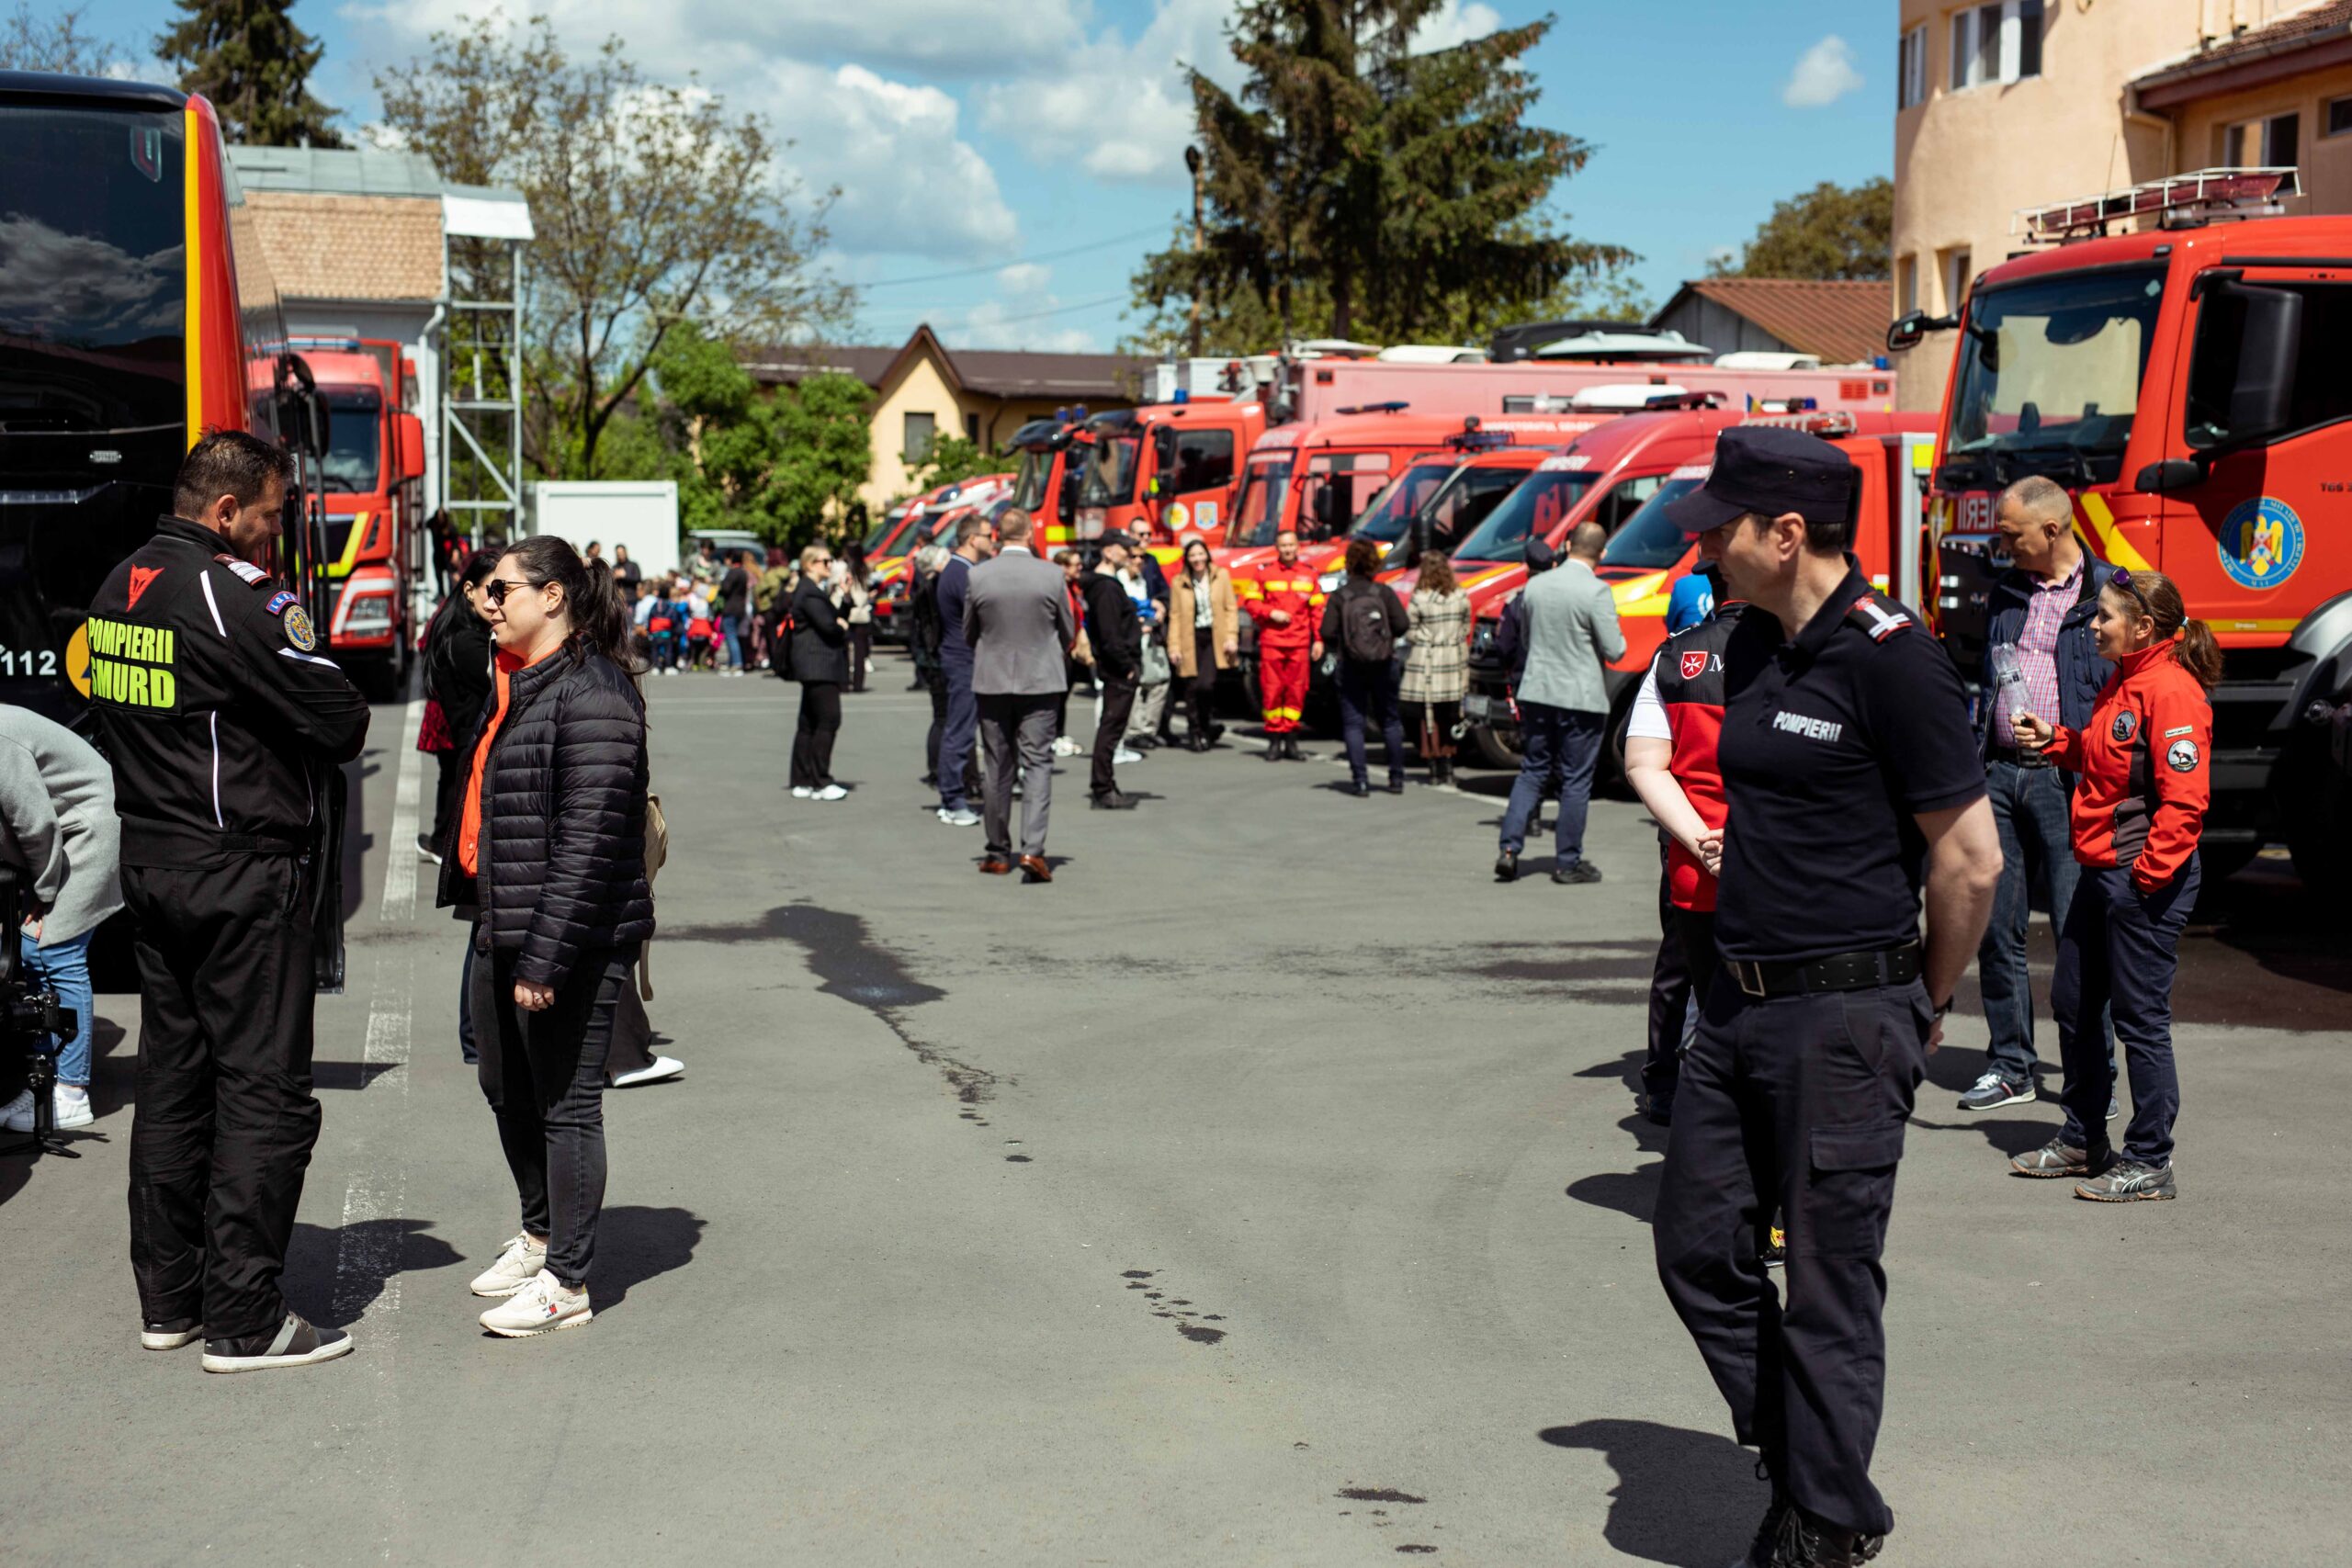 Participants of the ENGAGE validation exercise in front of fire trucks